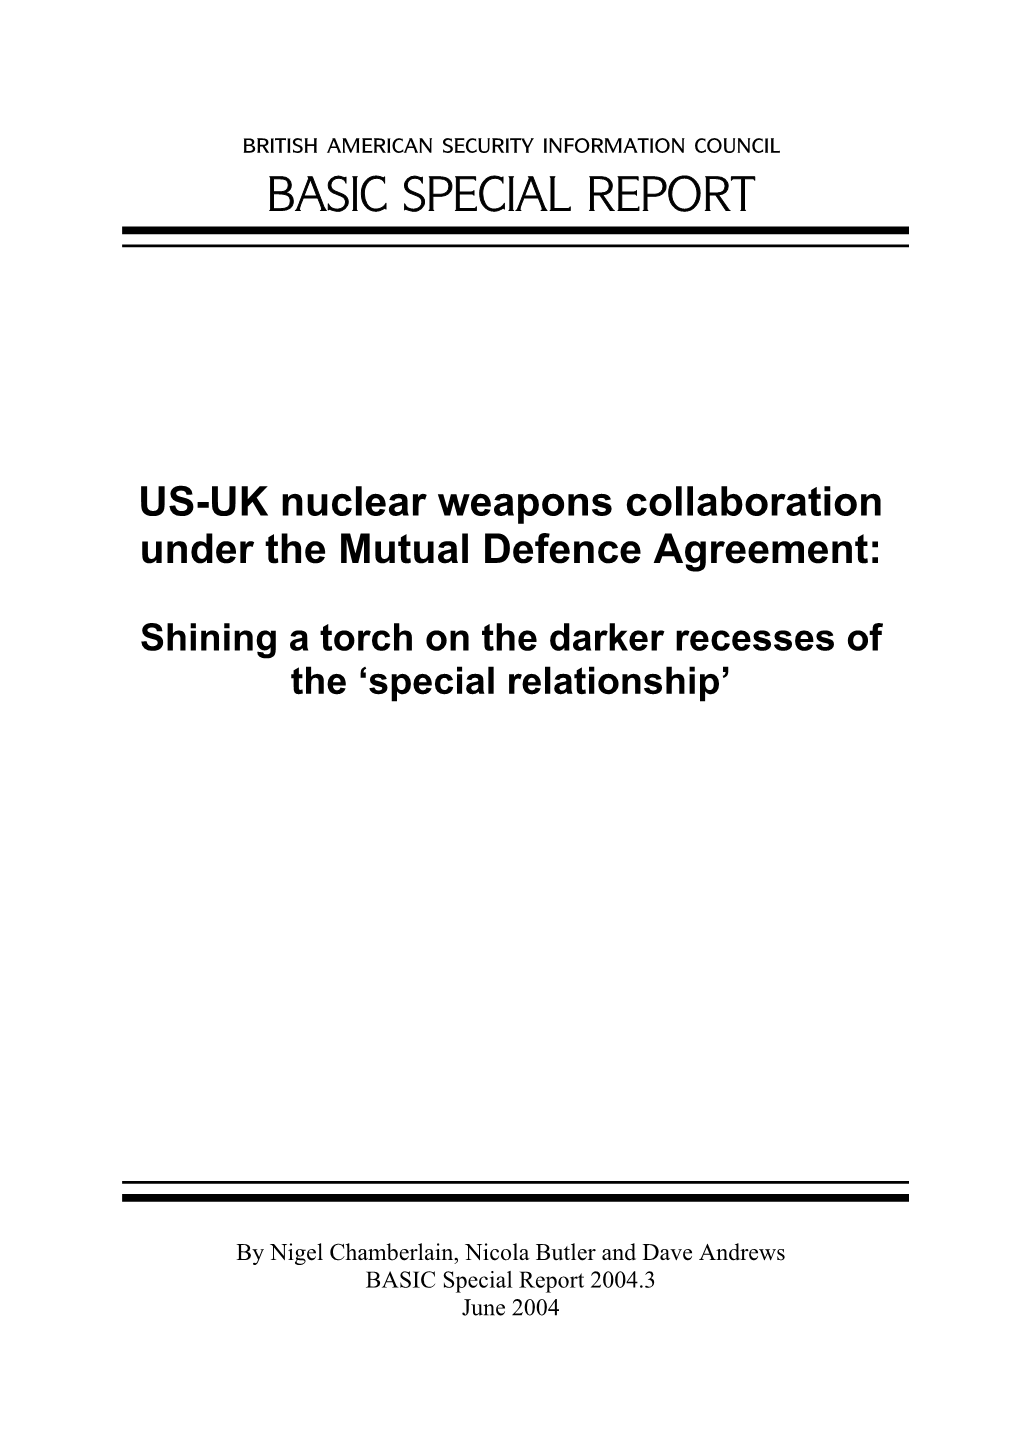 US-UK Nuclear Weapons Collaboration Under the Mutual Defence Agreement